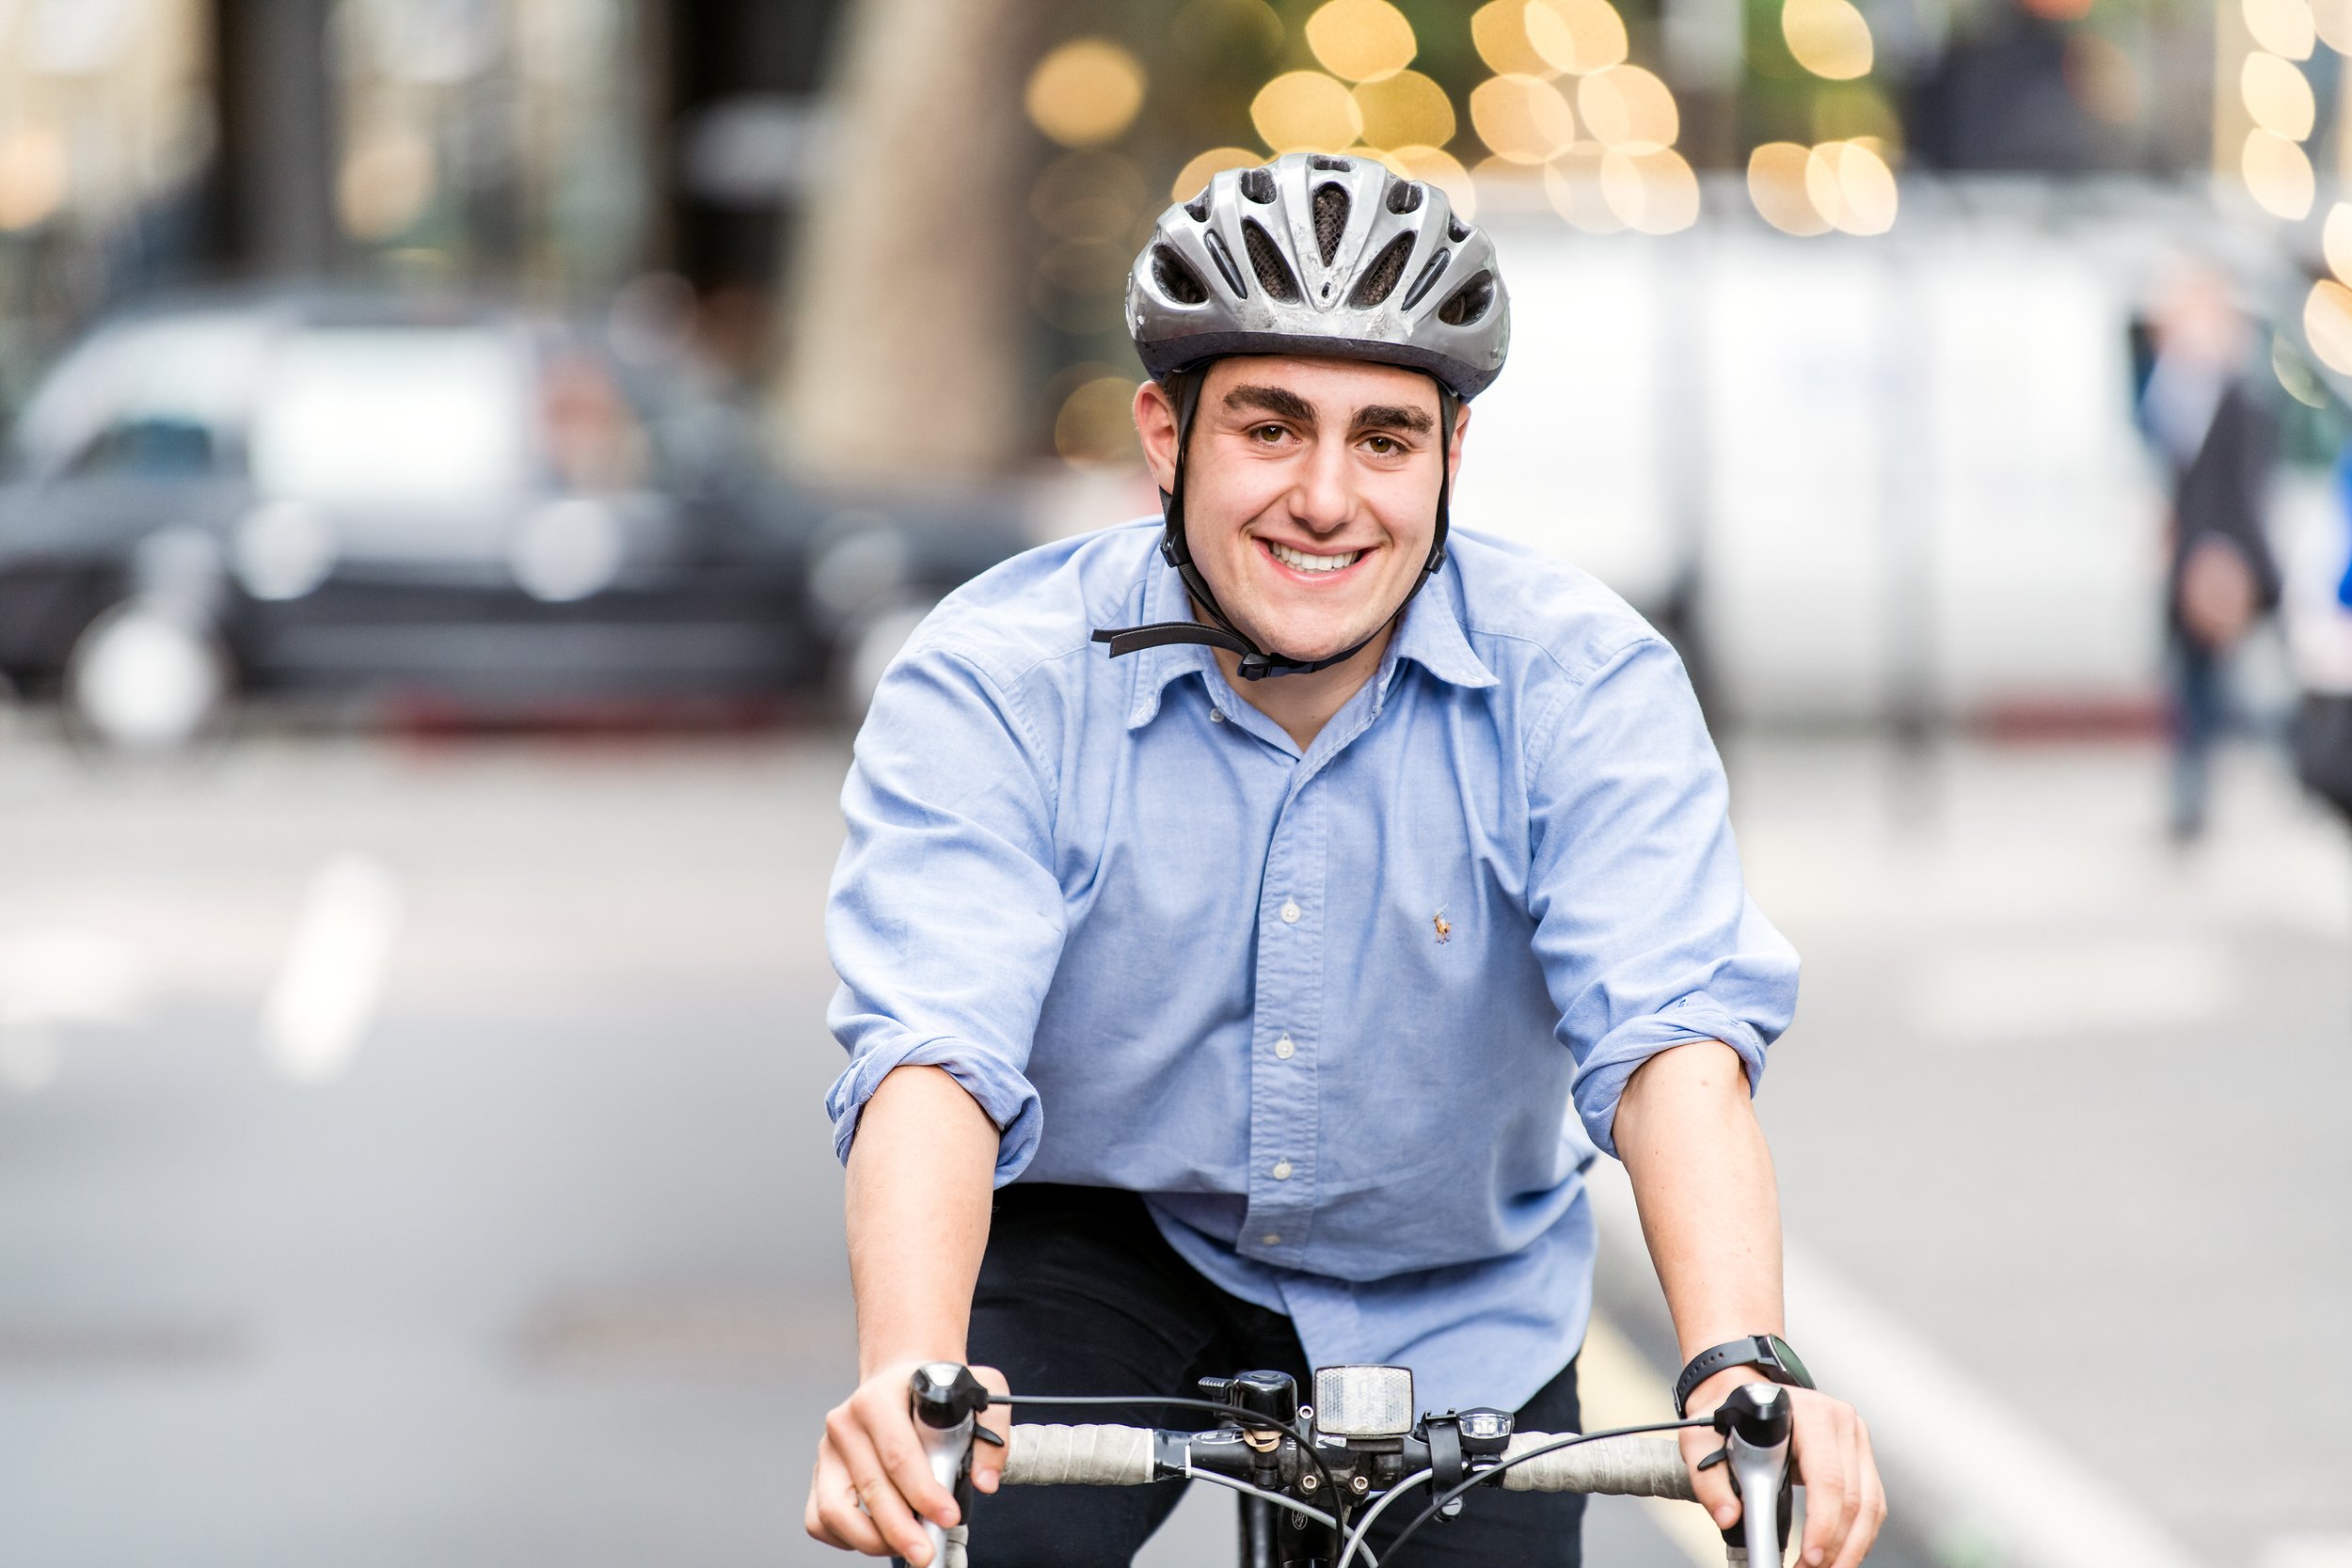  Man with helmet riding on his bike to work. 